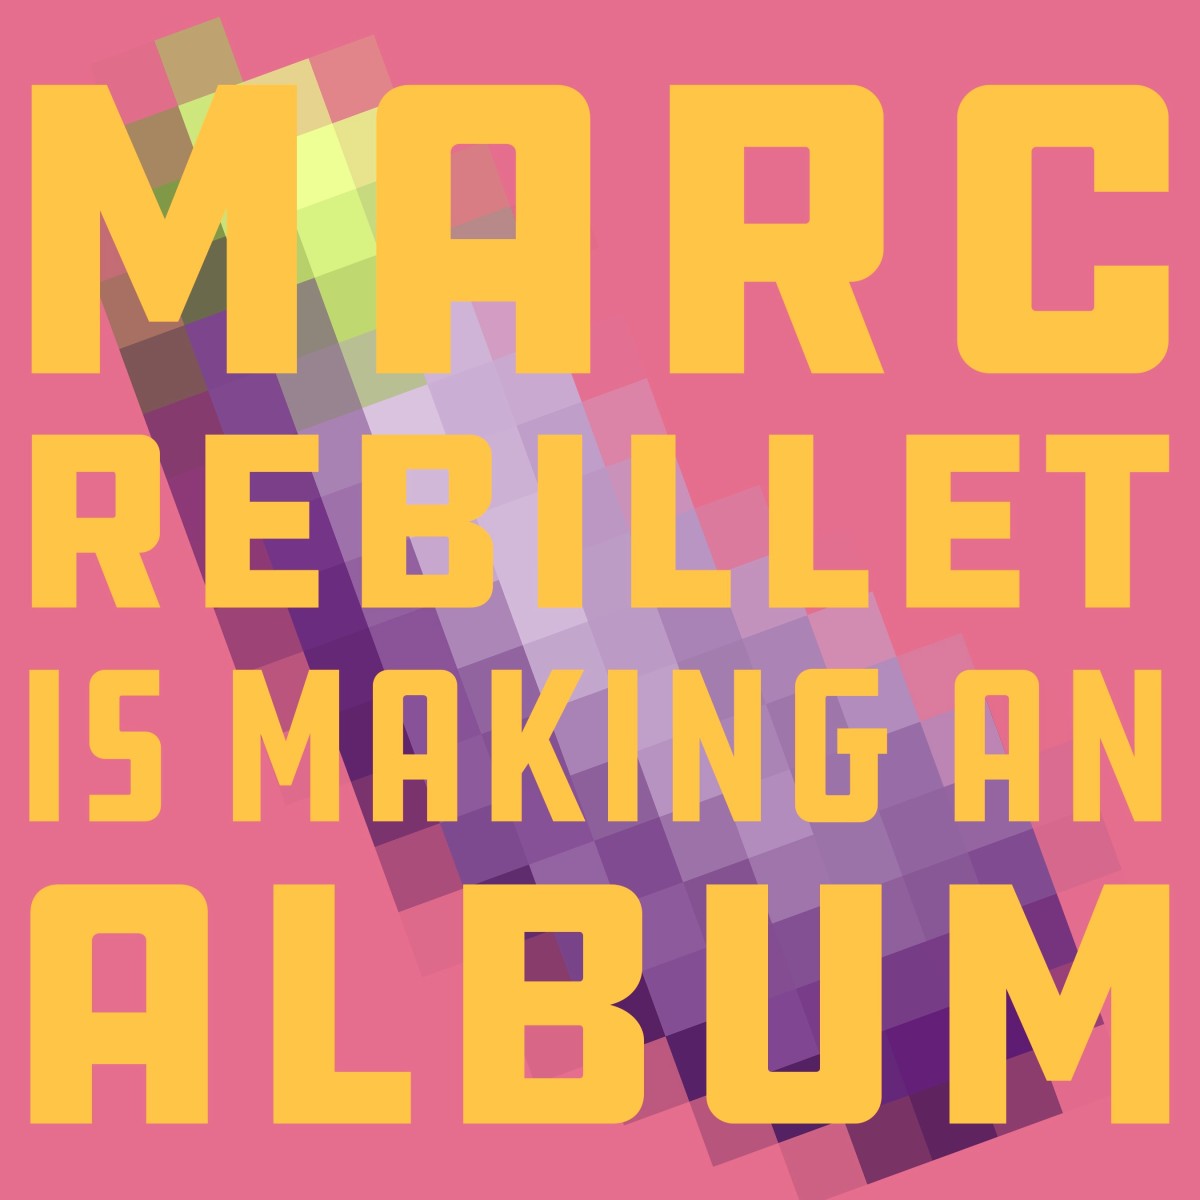 Marc Rebillet has announced the first-ever live debut album recording experience.